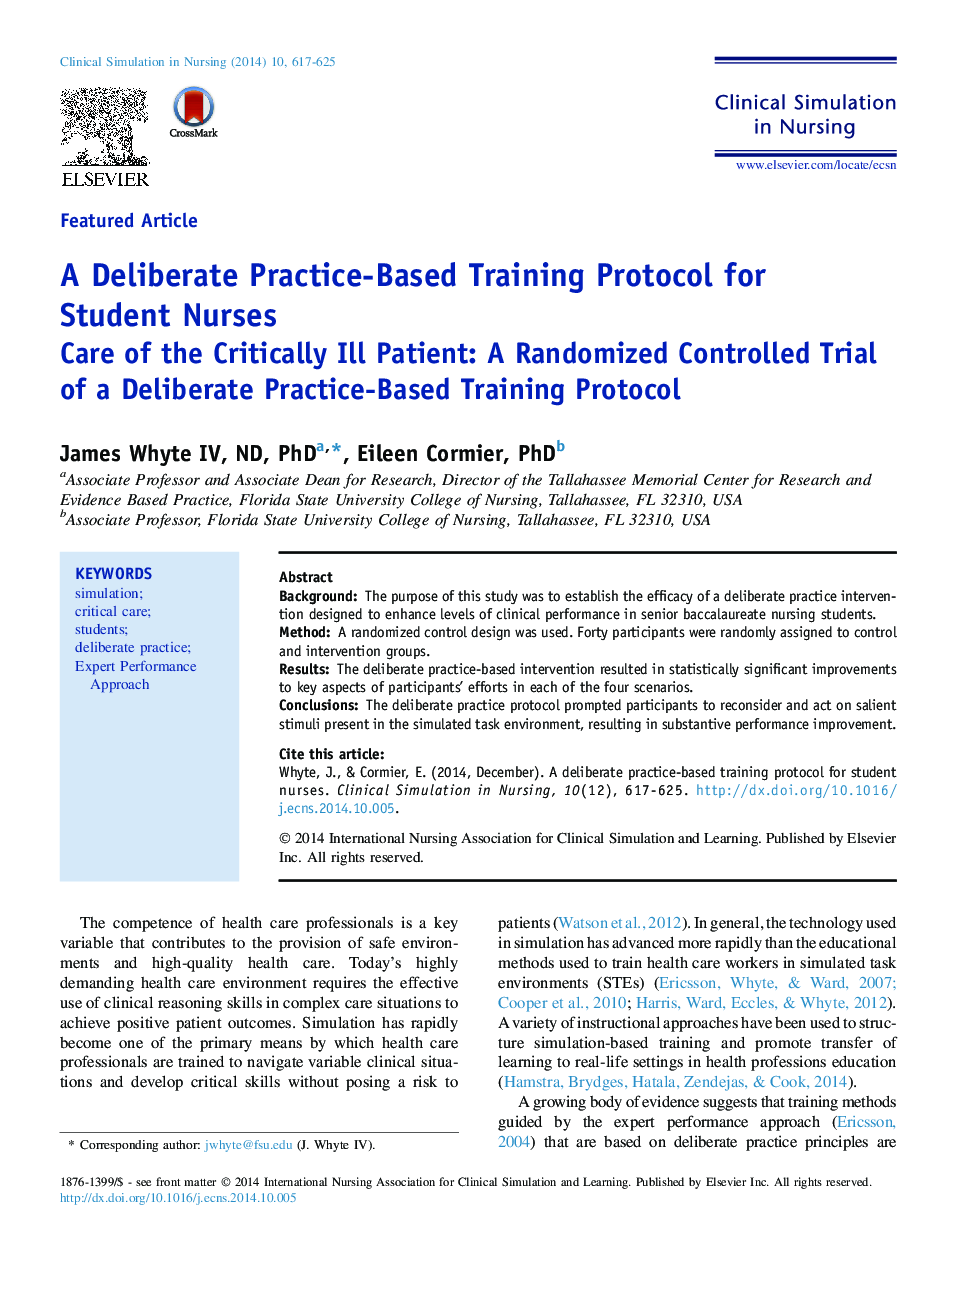 A Deliberate Practice-Based Training Protocol for Student Nurses: Care of the Critically Ill Patient: A Randomized Controlled Trial of a Deliberate Practice-Based Training Protocol